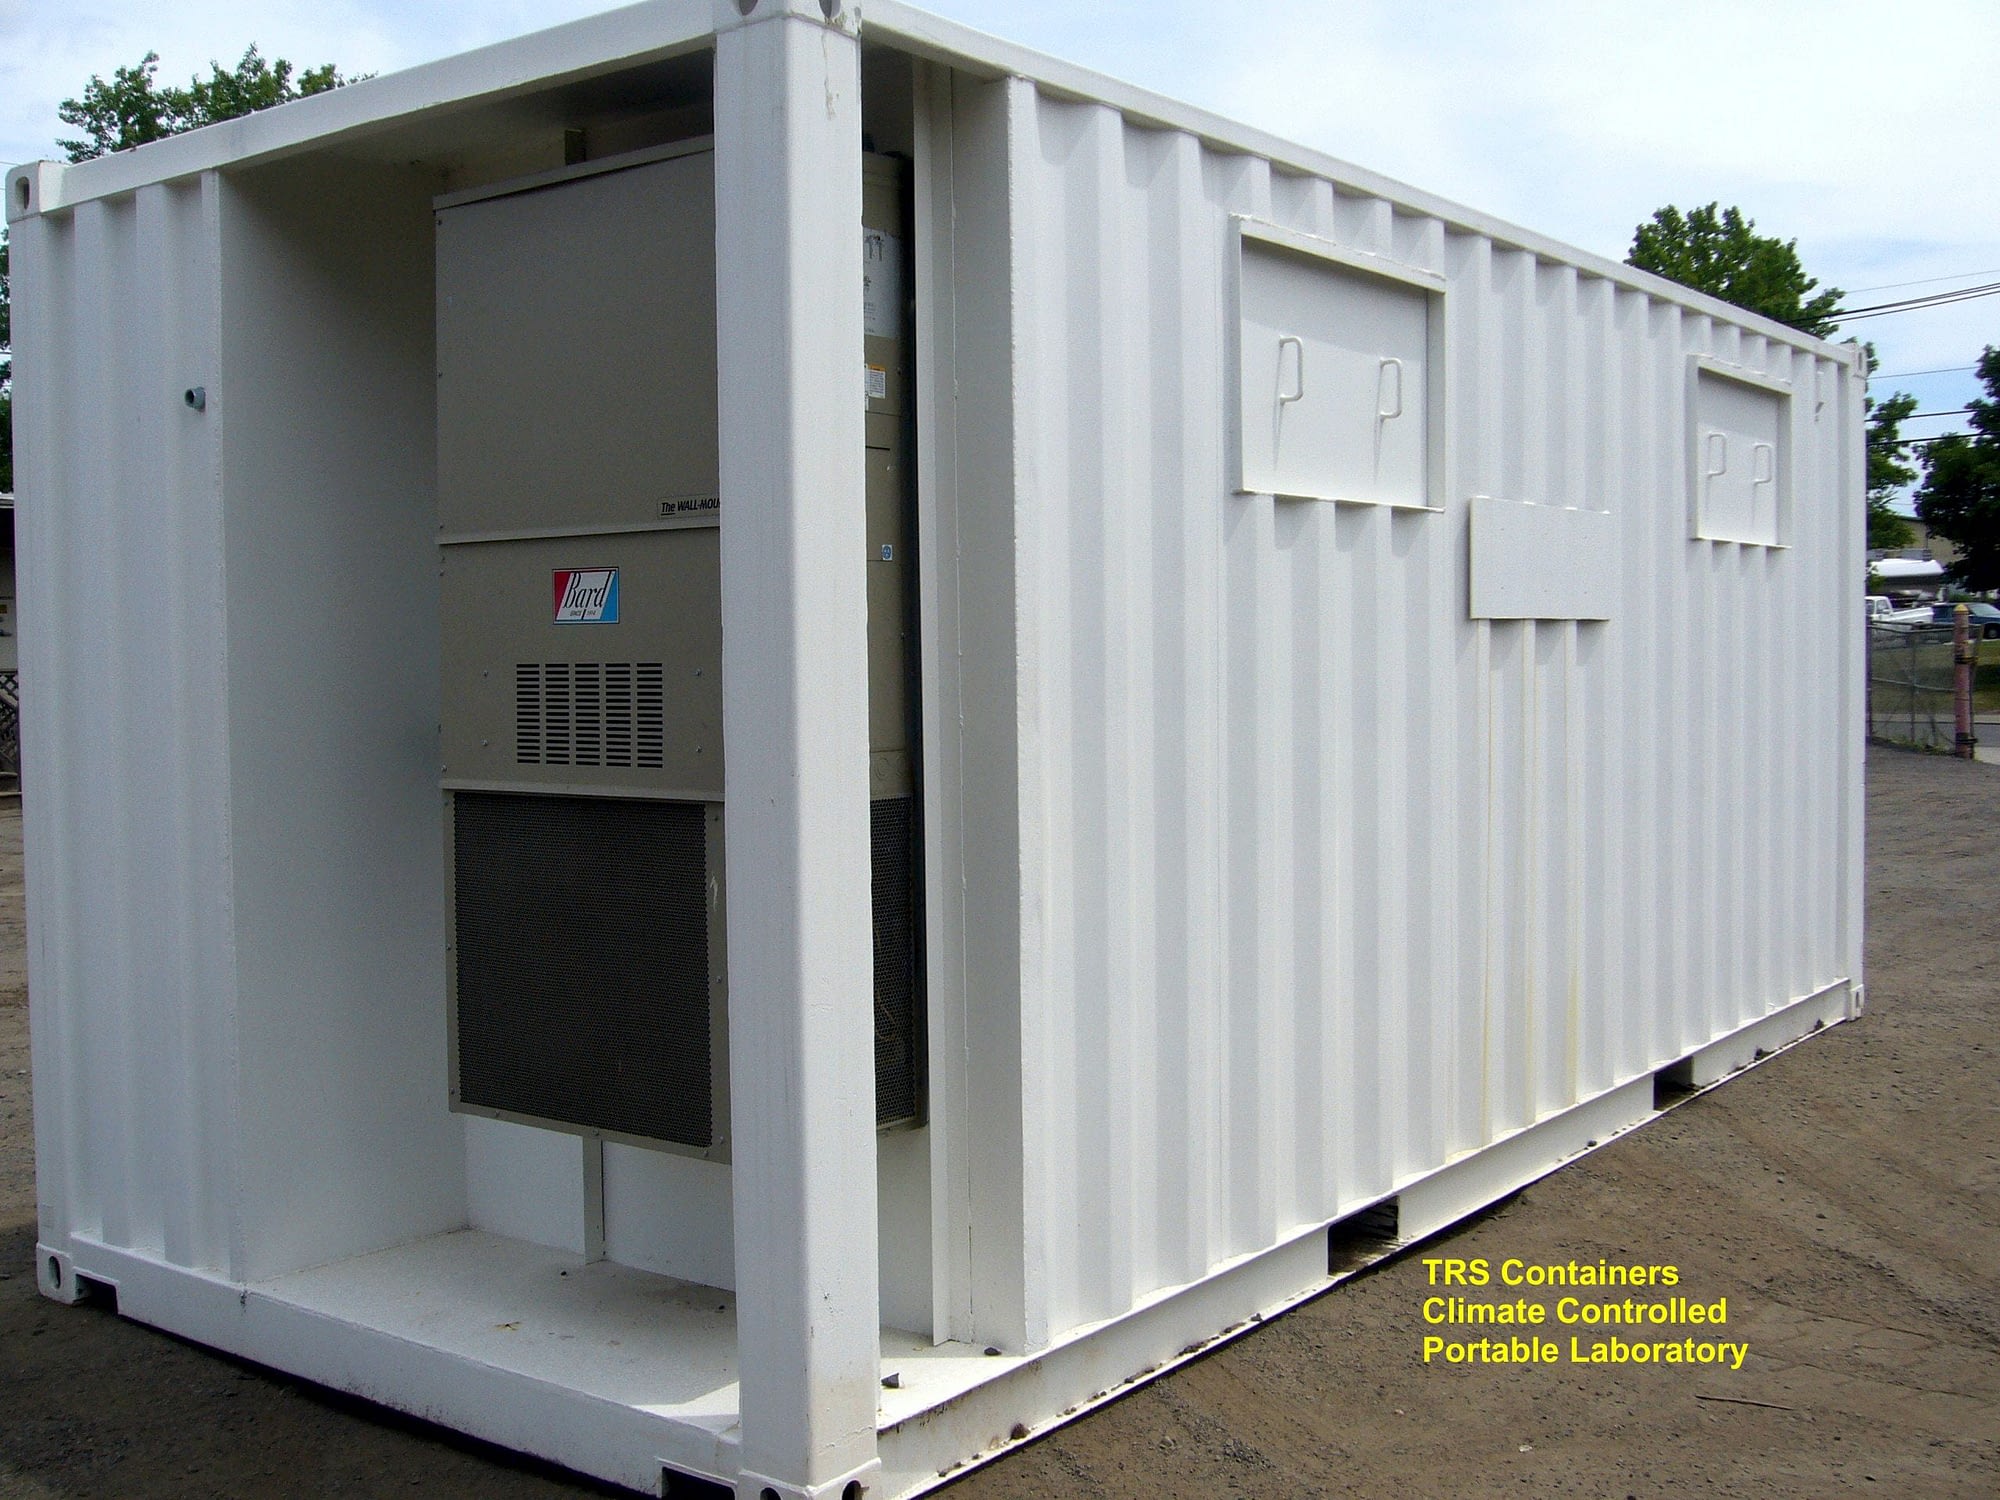 TRS climate control portable containers have 1 or 2 Bard HVAC units